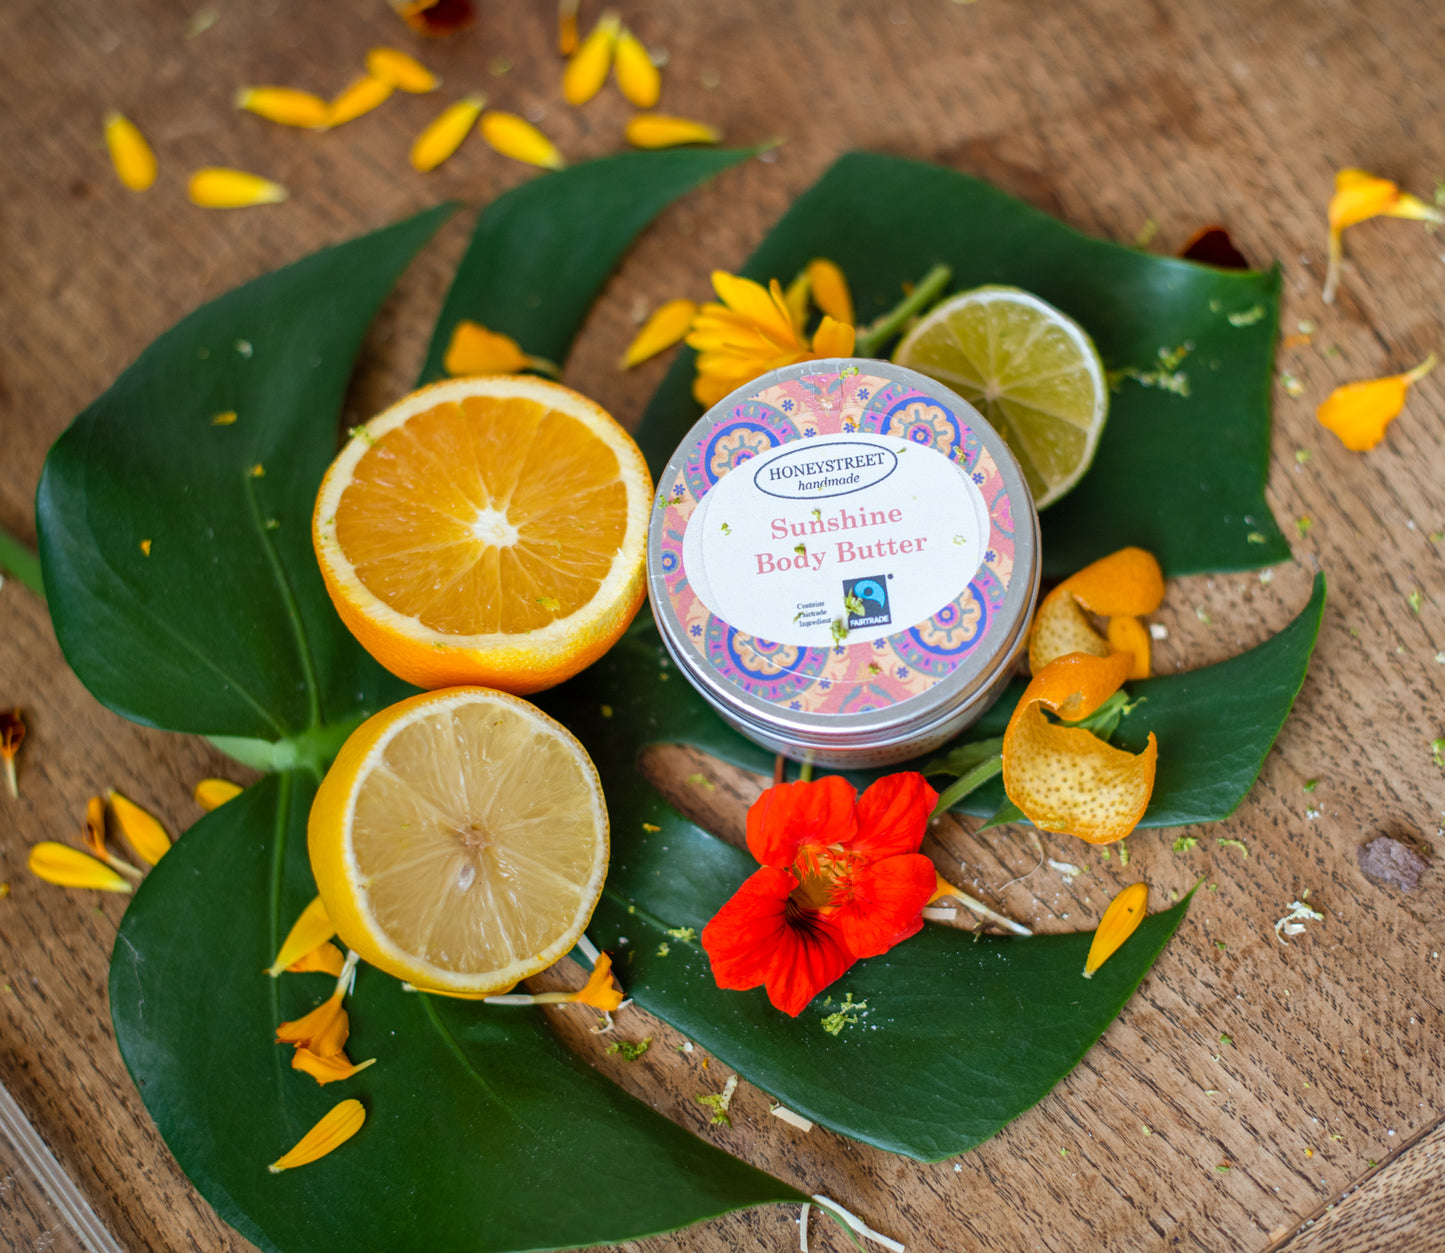 Sunshine Body Butter - The india Shop